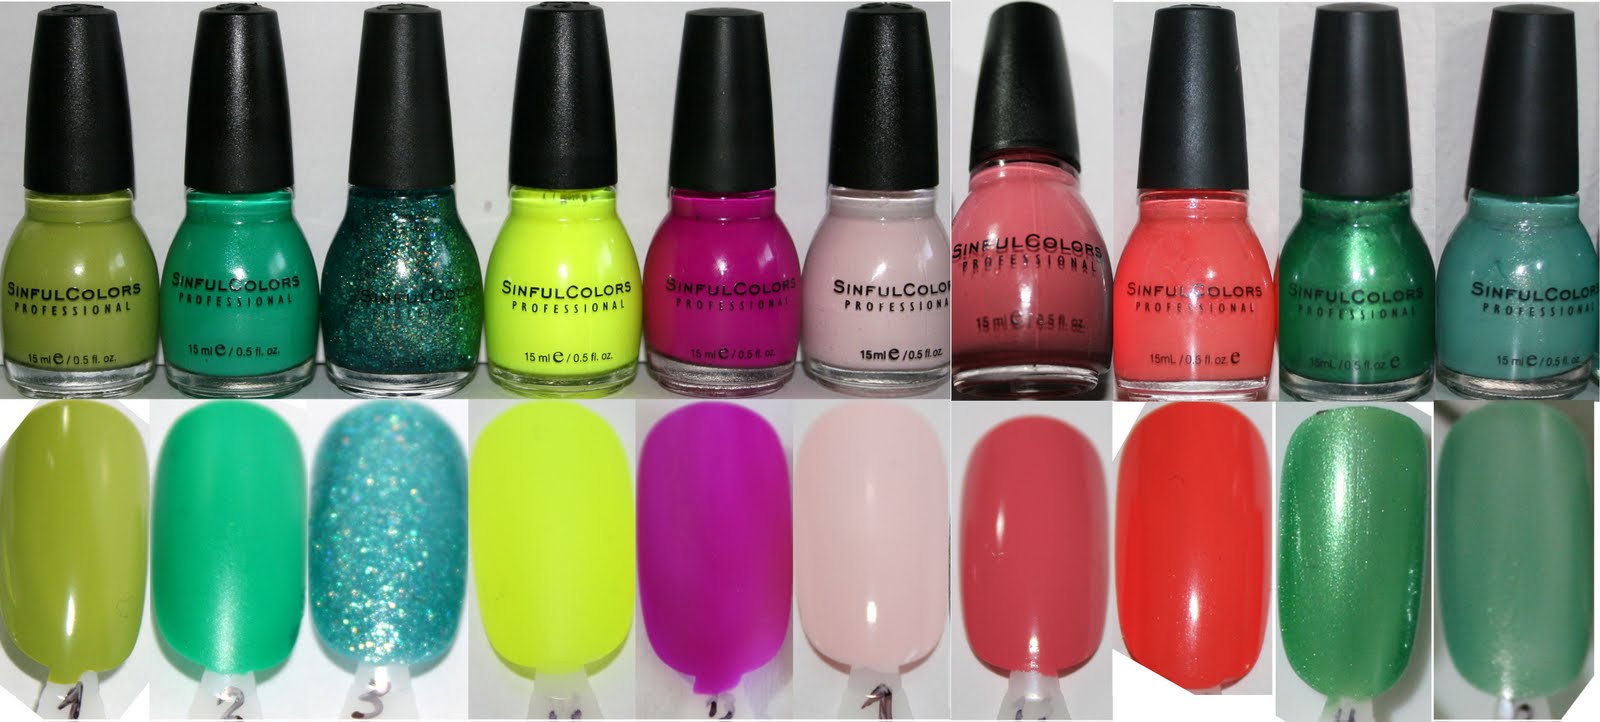 8. Sinful Colors Nail Polish in "Memorial Day Manicure Set" - wide 10